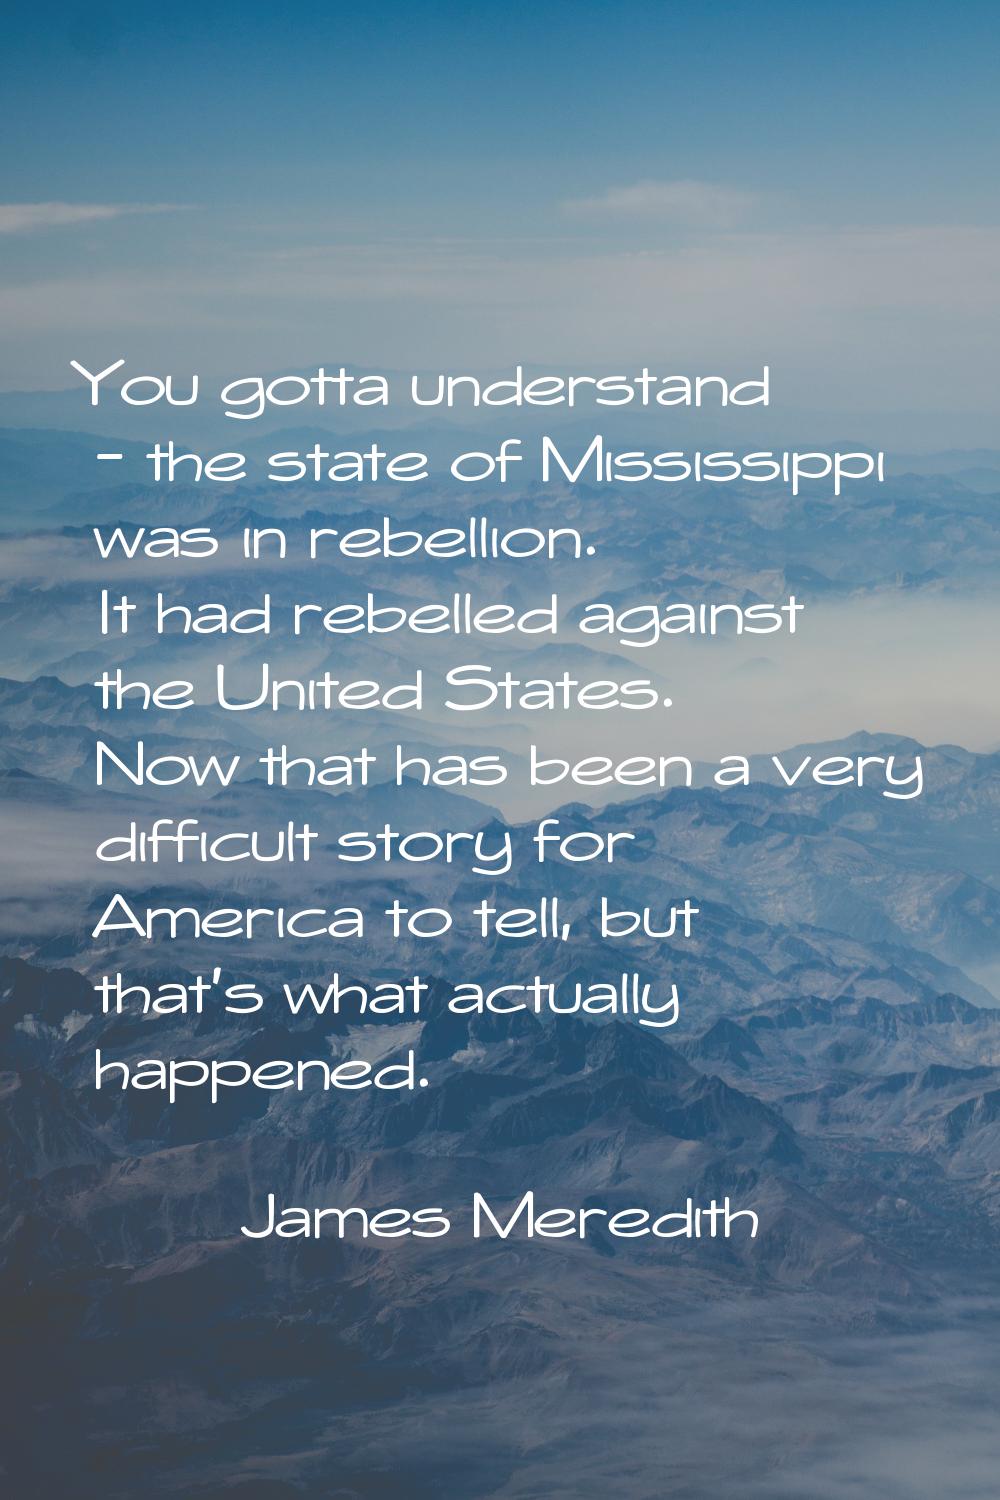 You gotta understand - the state of Mississippi was in rebellion. It had rebelled against the Unite